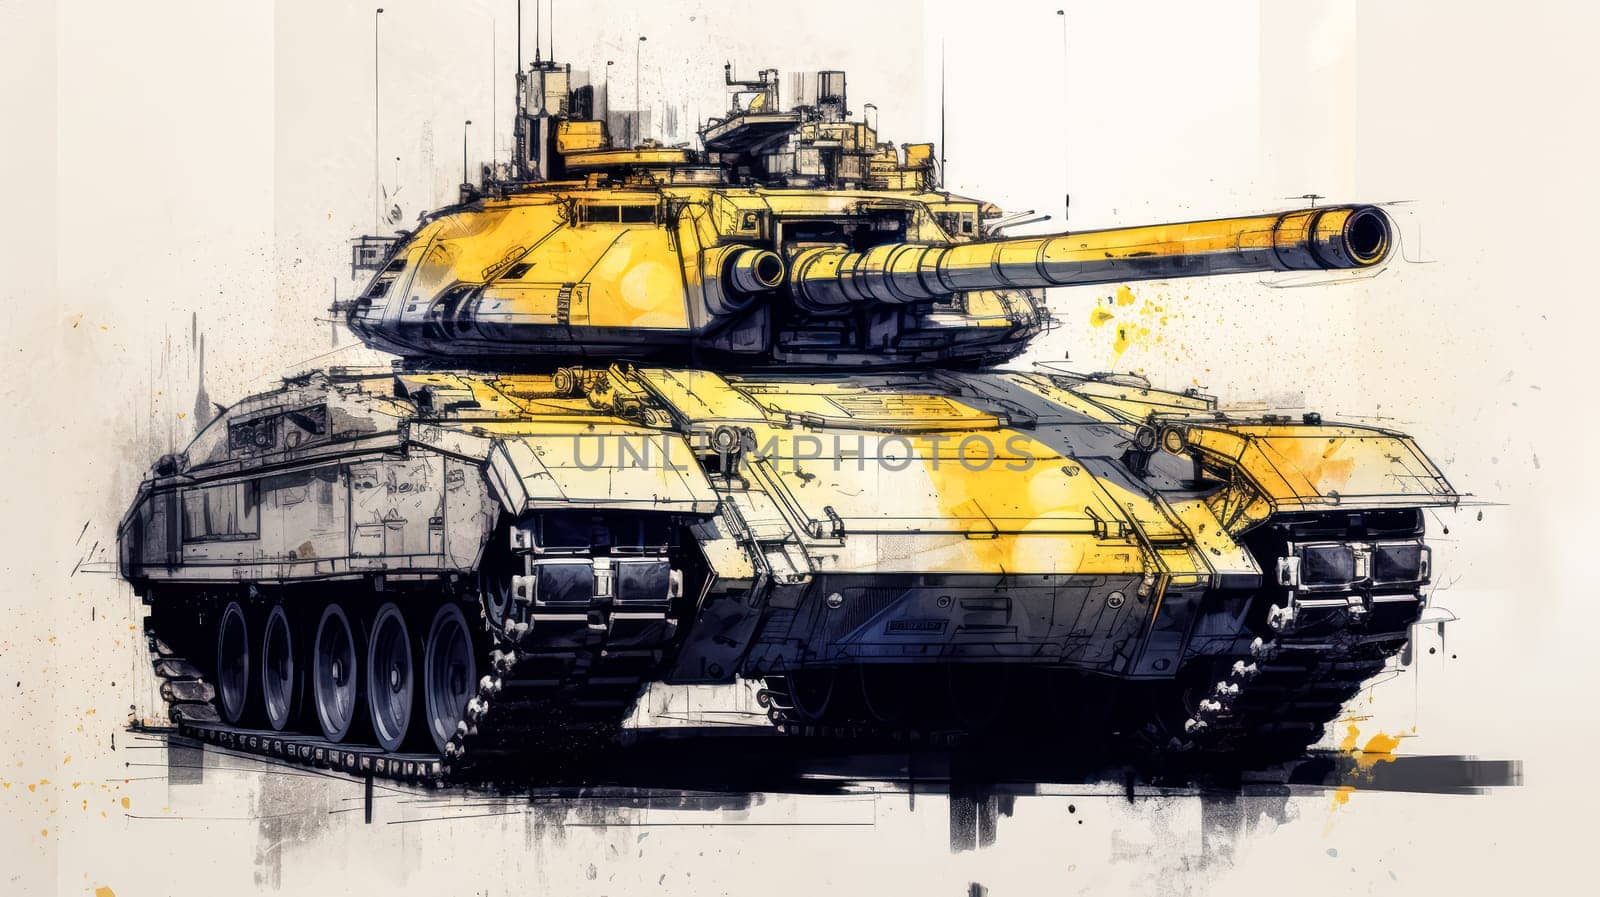 A striking watercolor sketch of a tank with yellow gray lines by Alla_Morozova93